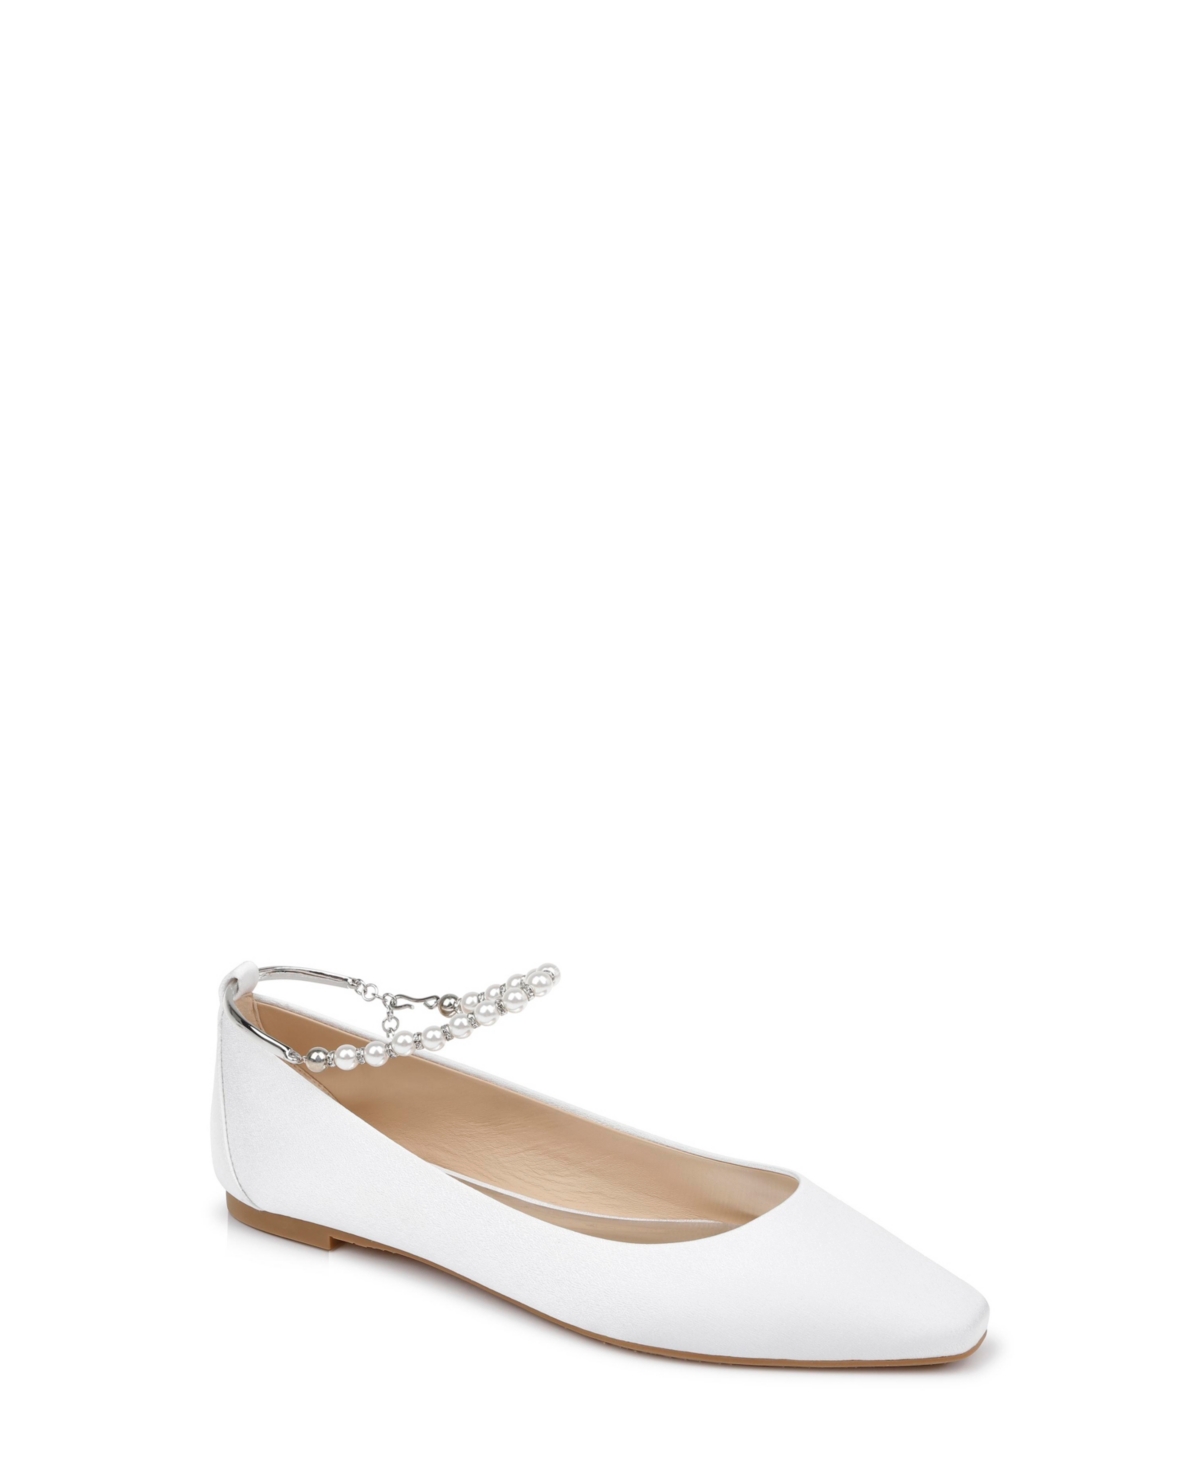 Badgley Mischka Women's London Ankle Chain Evening Ballet Flats In White Crepe